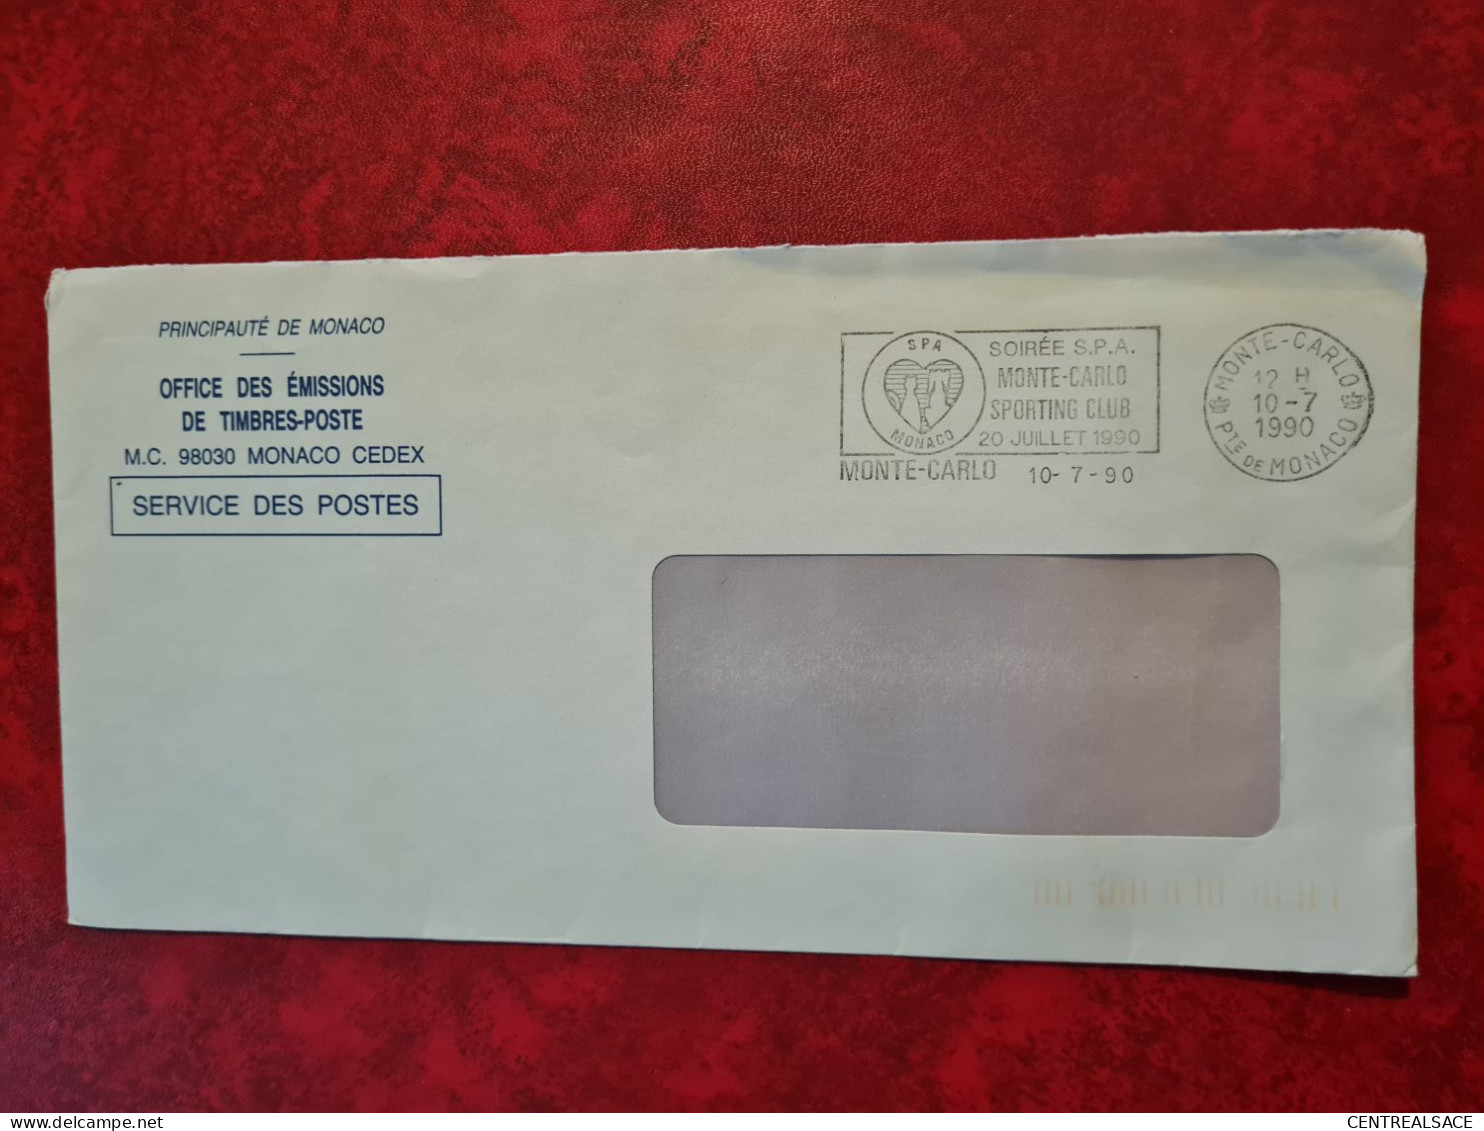 MONTE CARLO FLAMME SOIREE S.P.A. SPORTING CLUB 1990 OFFICE DES TIMBRES FRANCHISE - Briefe U. Dokumente